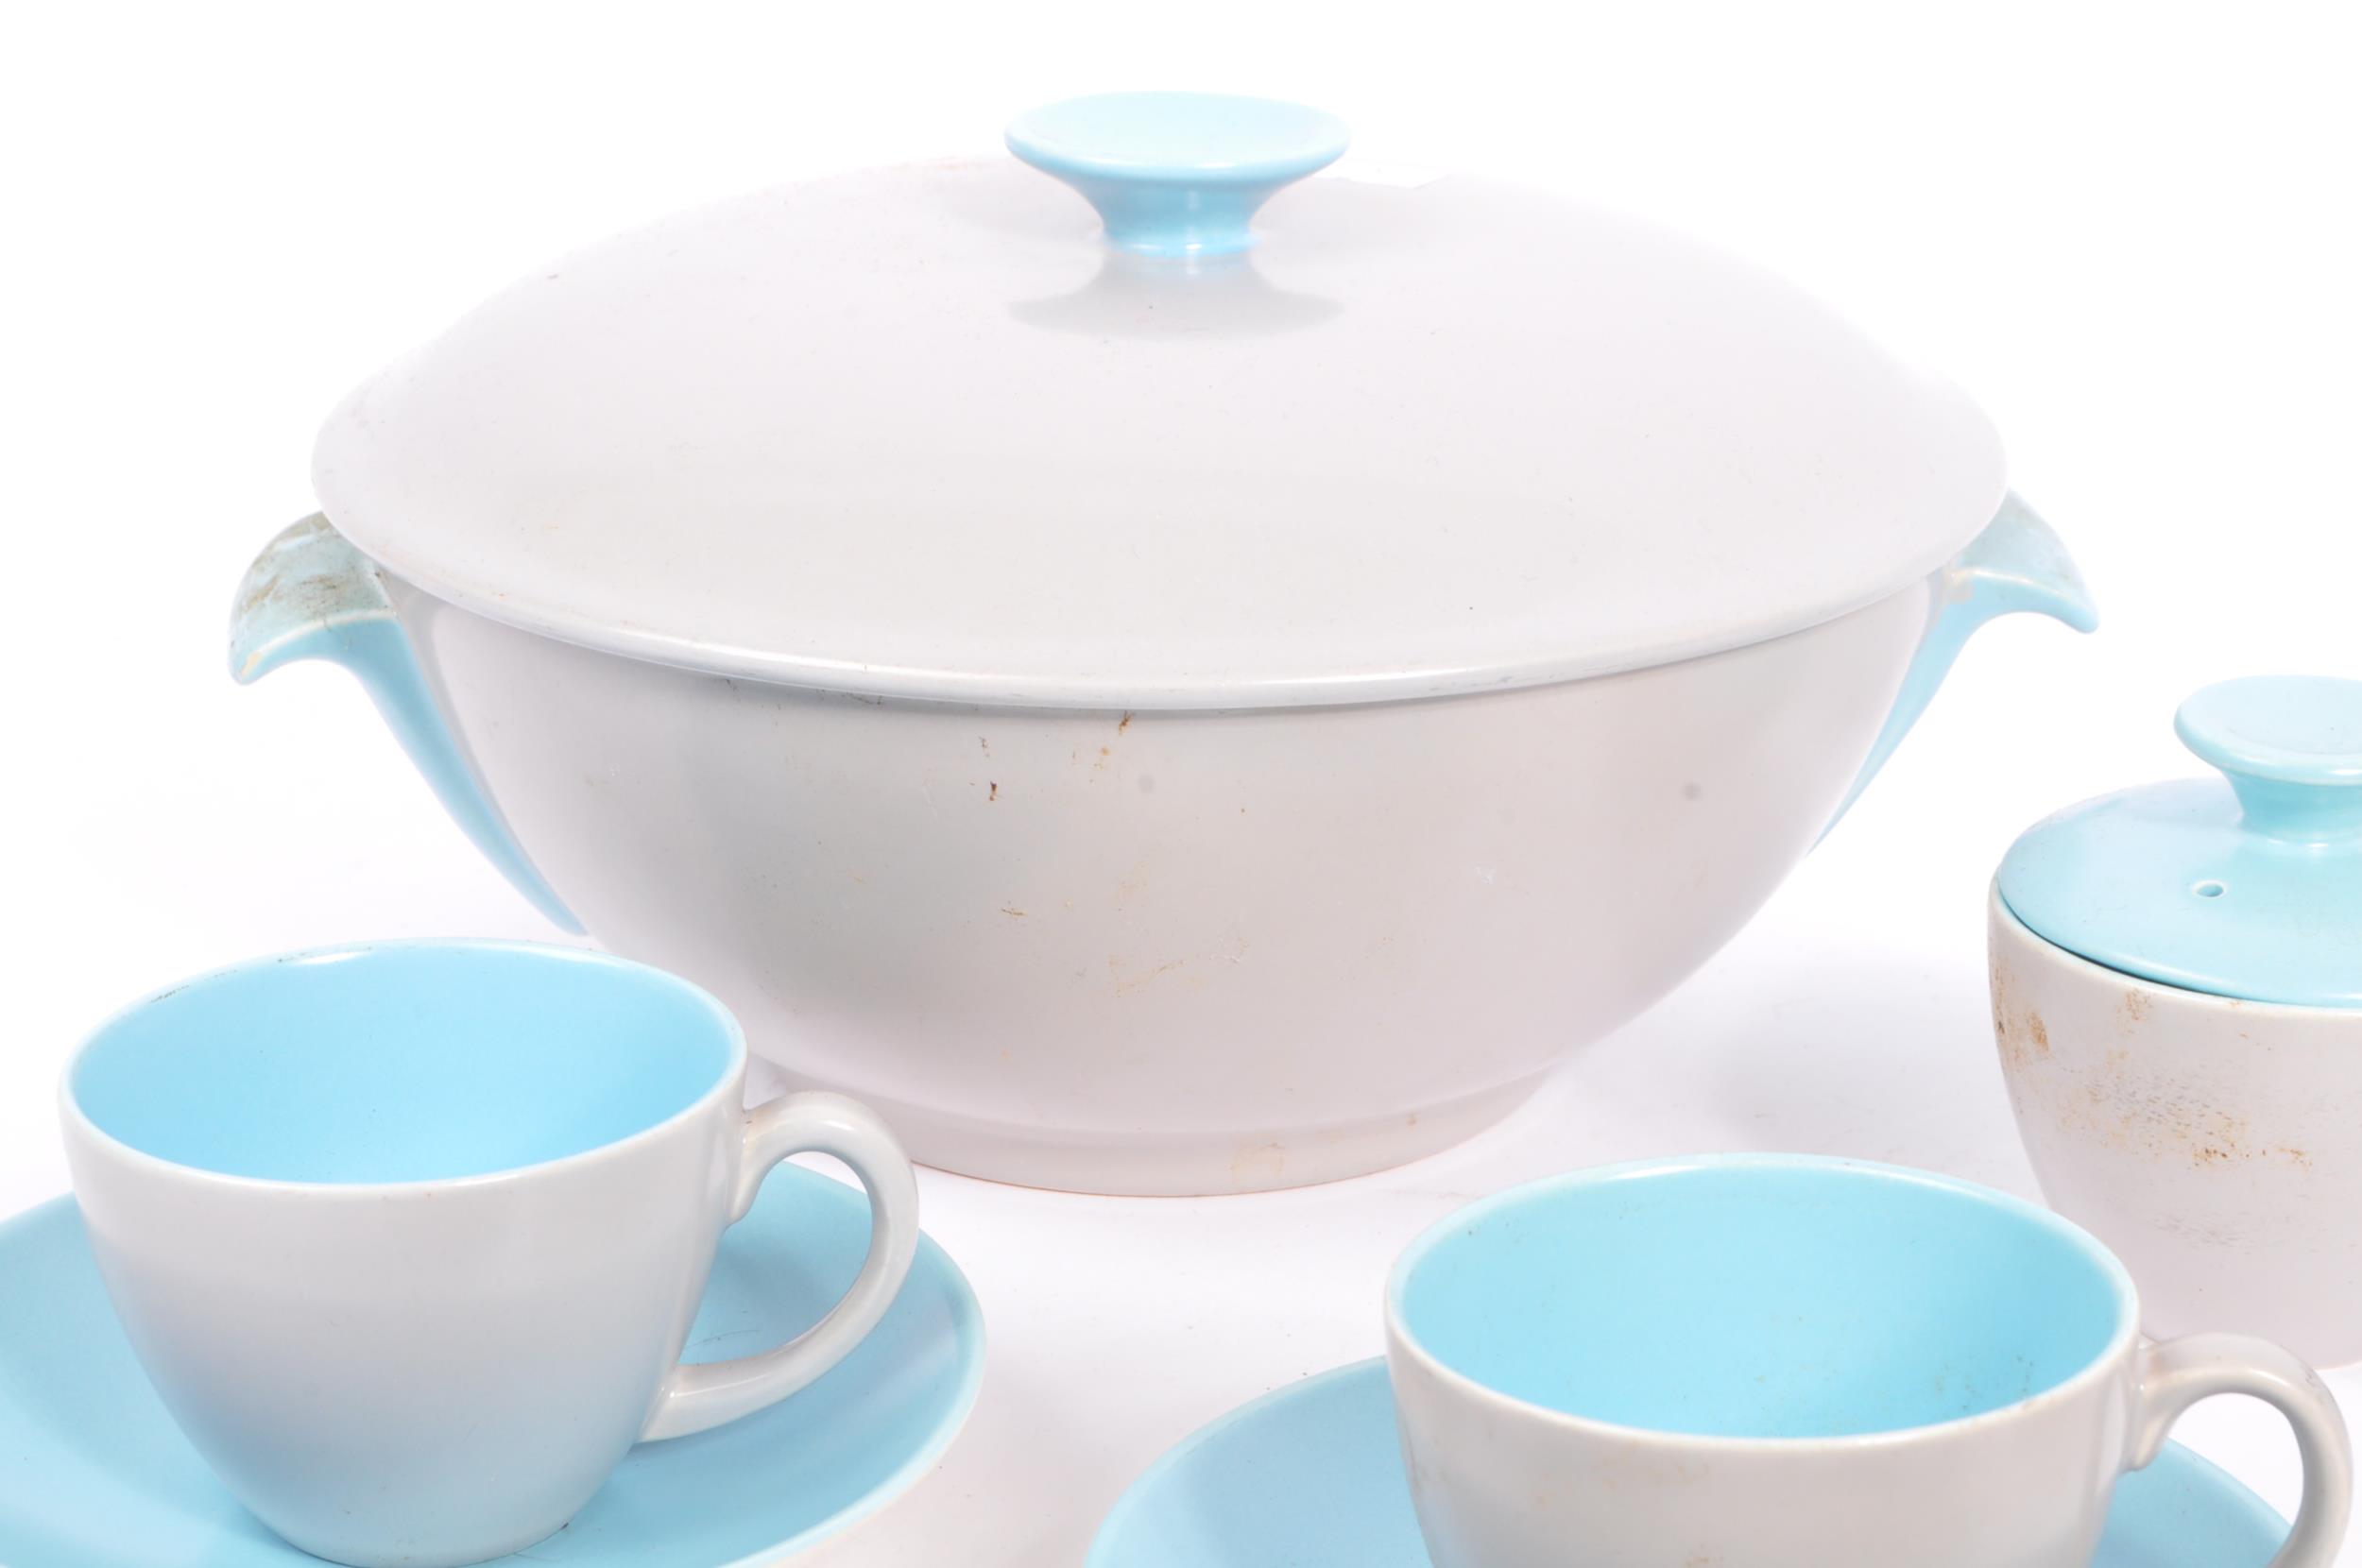 VINTAGE GREY & SKY BLUE TWINTONE SERVICE BY POOLE POTTERY - Image 4 of 8